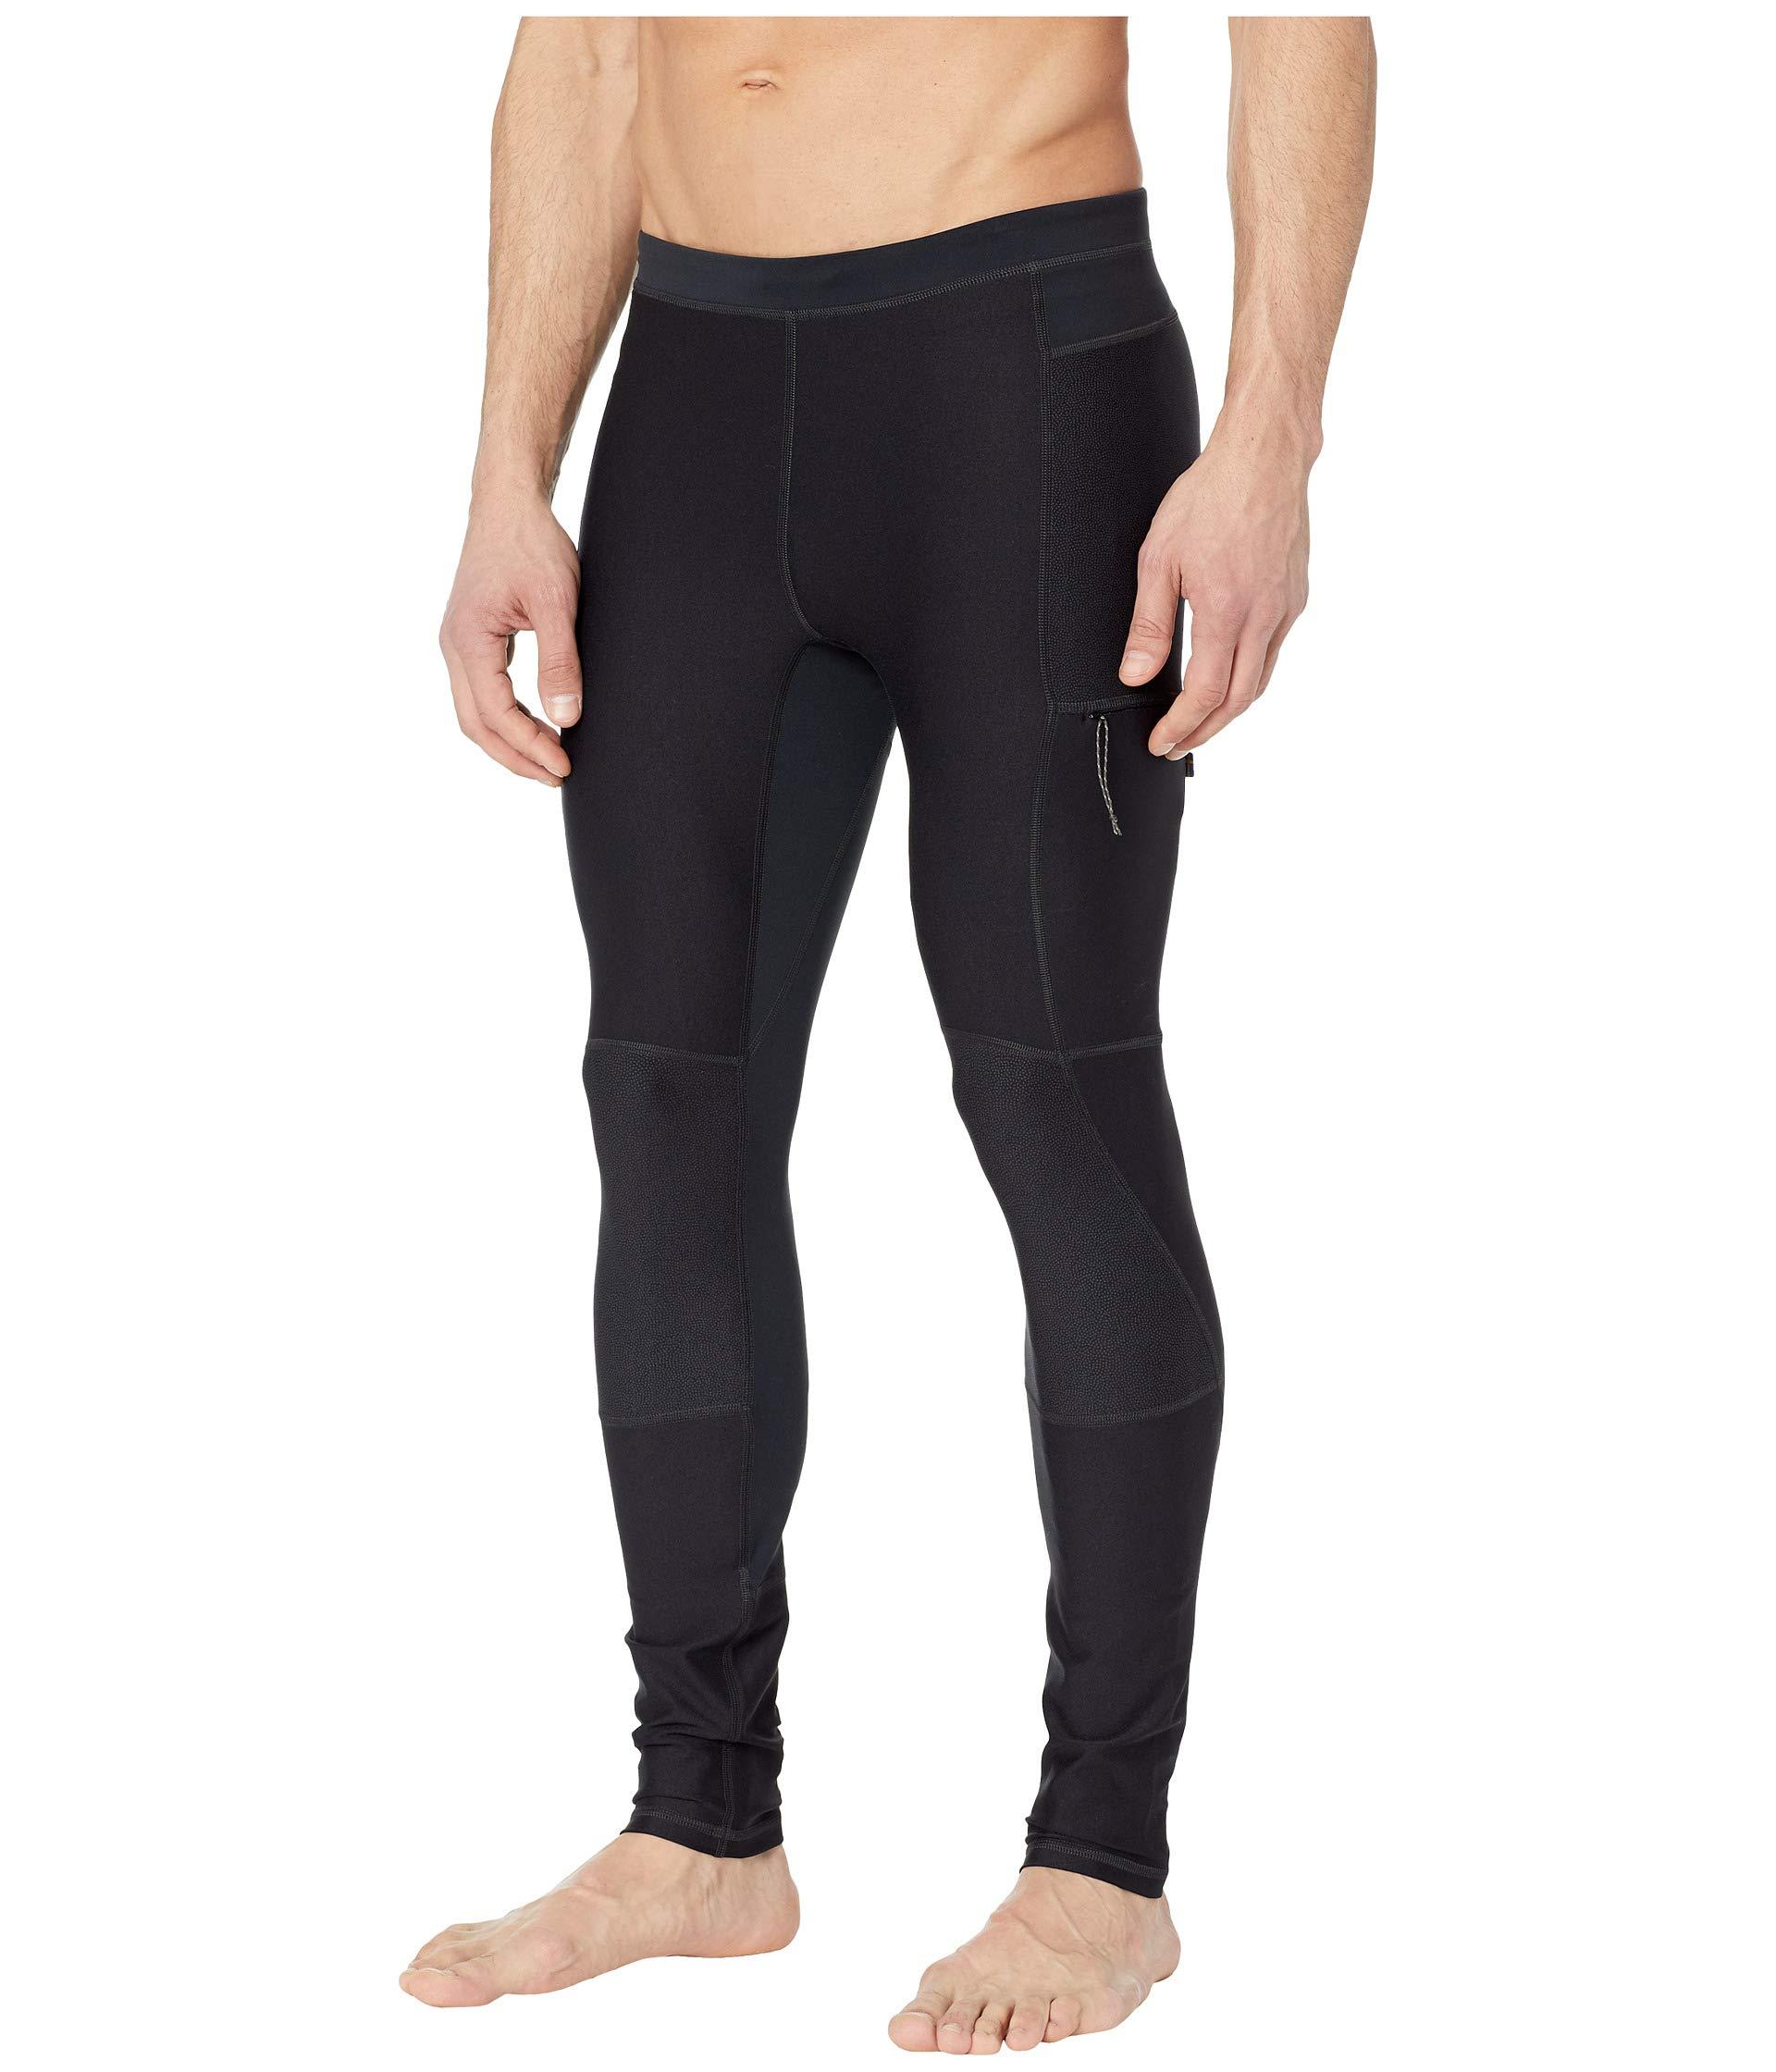 Fjallraven Synthetic Abisko Trail Tights in Black for Men - Lyst